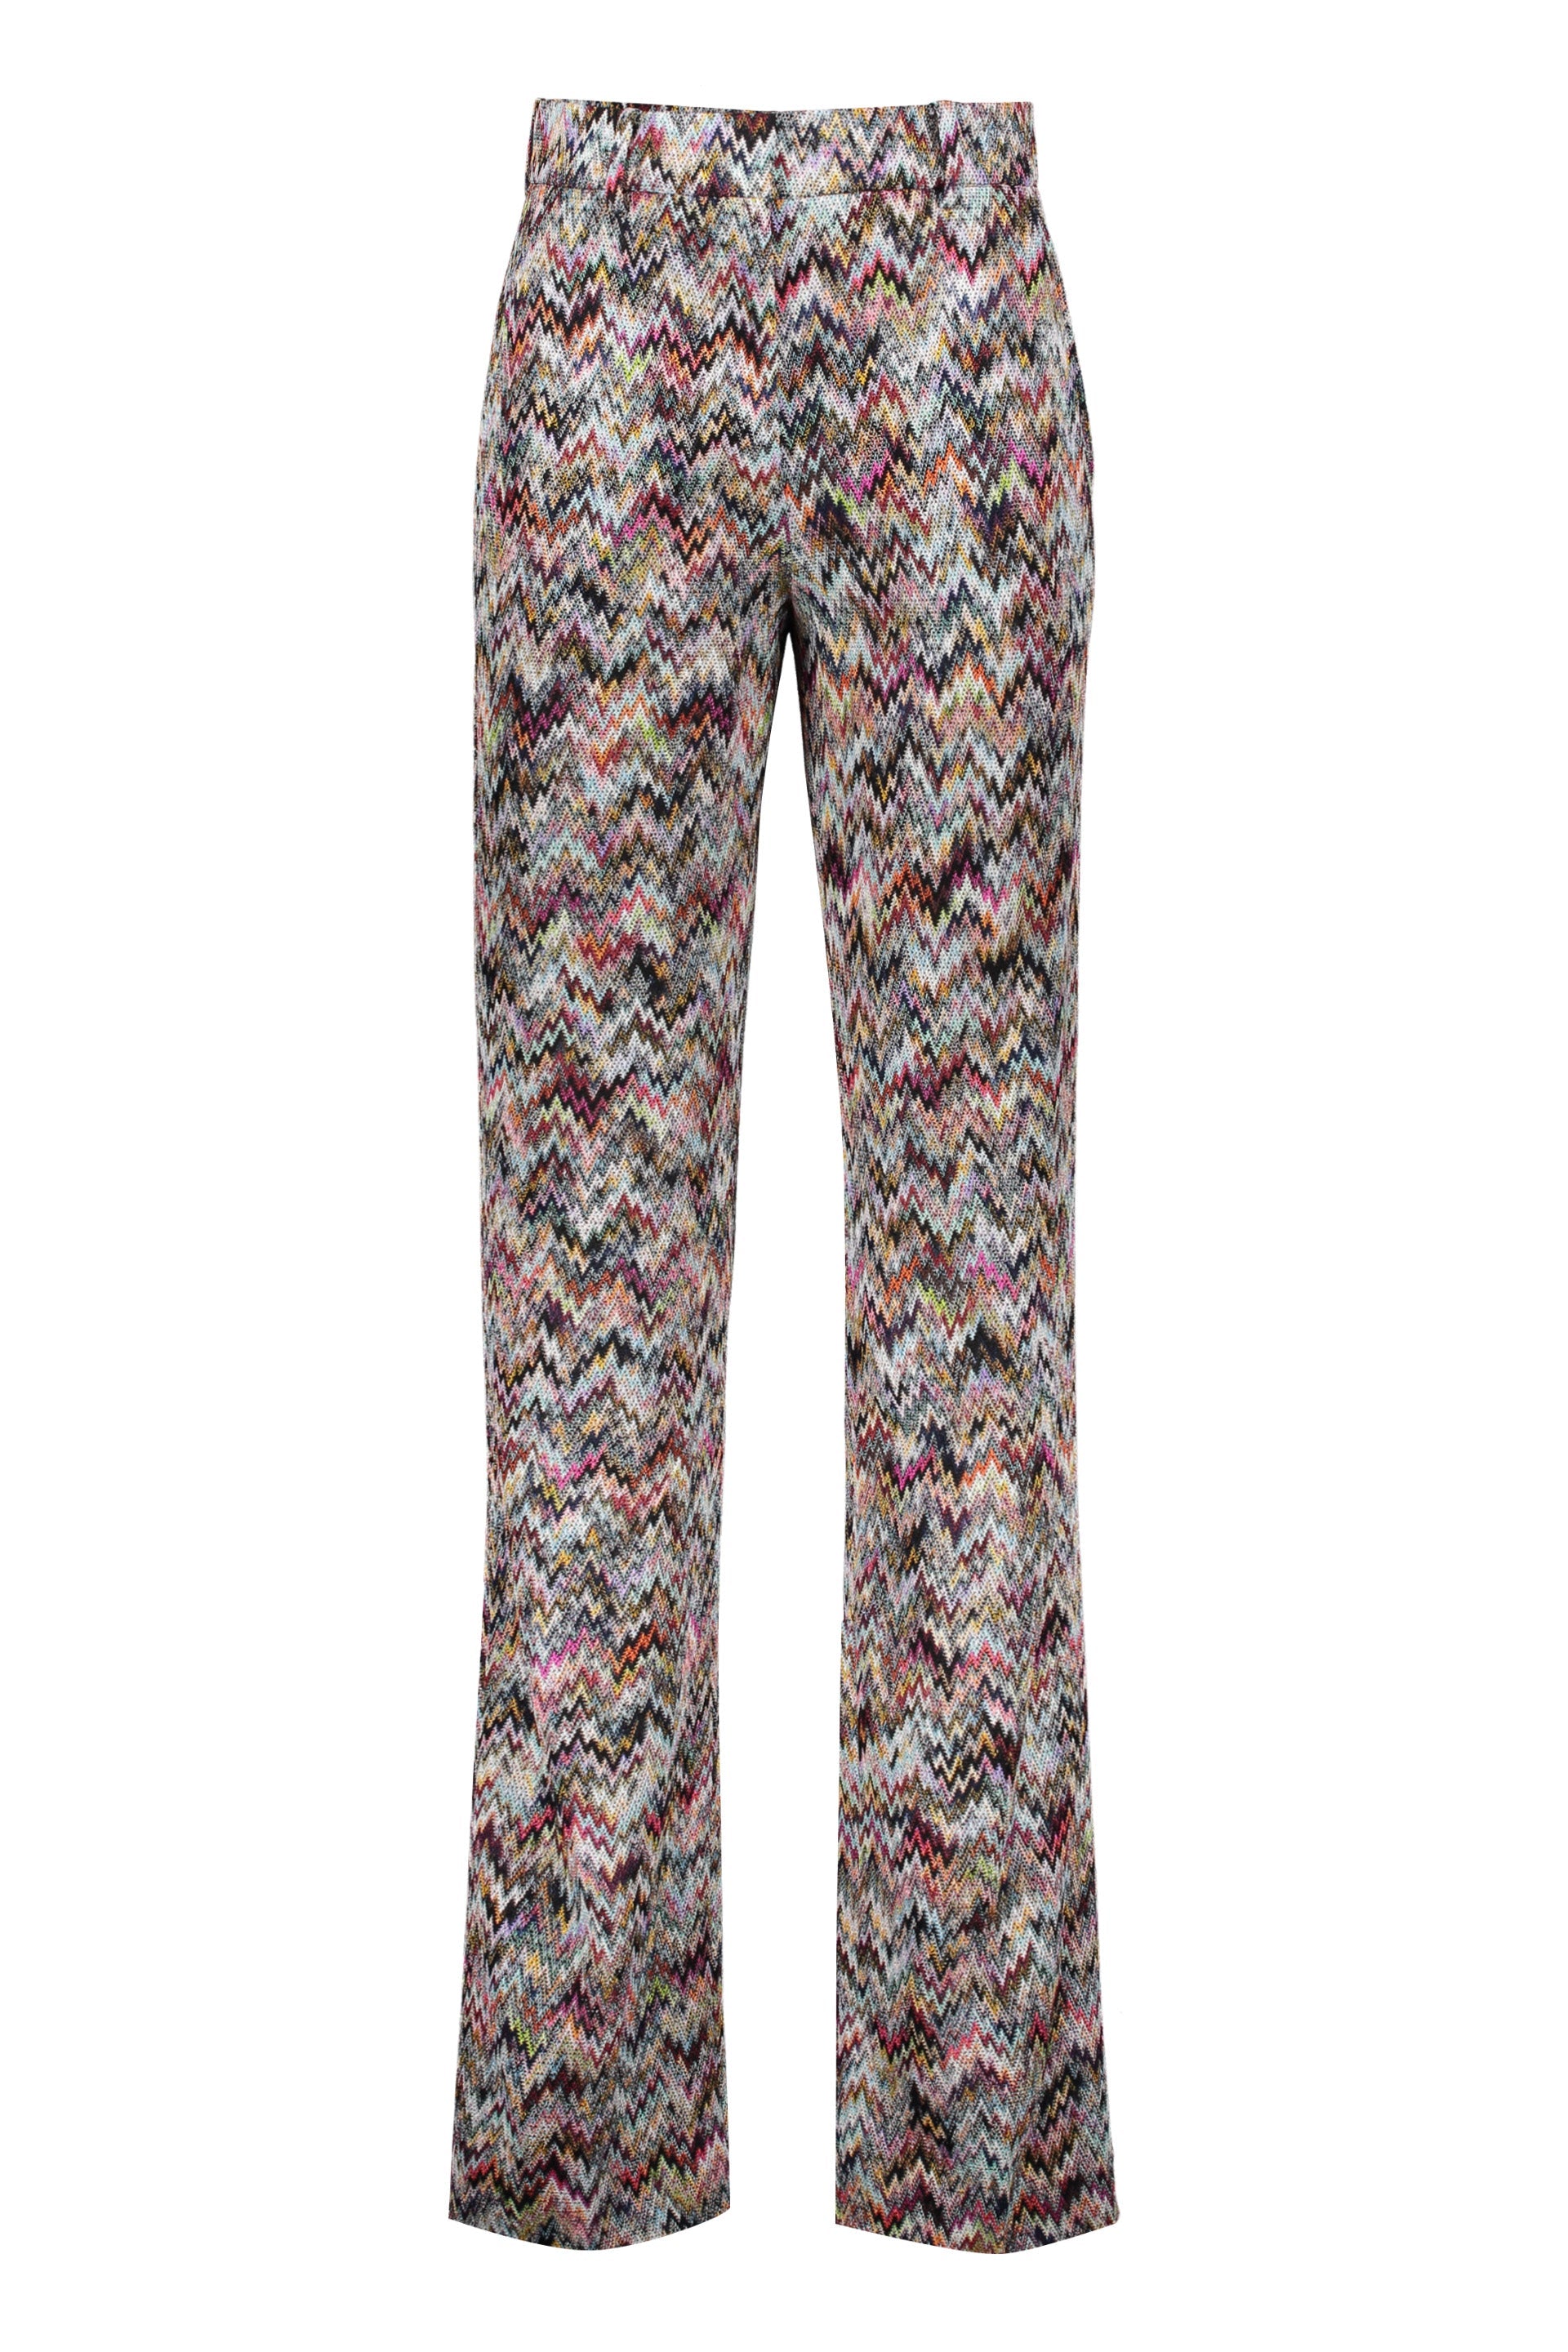 Missoni-OUTLET-SALE-Chevron-knitted-palazzo-trousers-Hosen-40-ARCHIVE-COLLECTION_489bab74-6366-4ca7-a1e6-969402a68a52.jpg